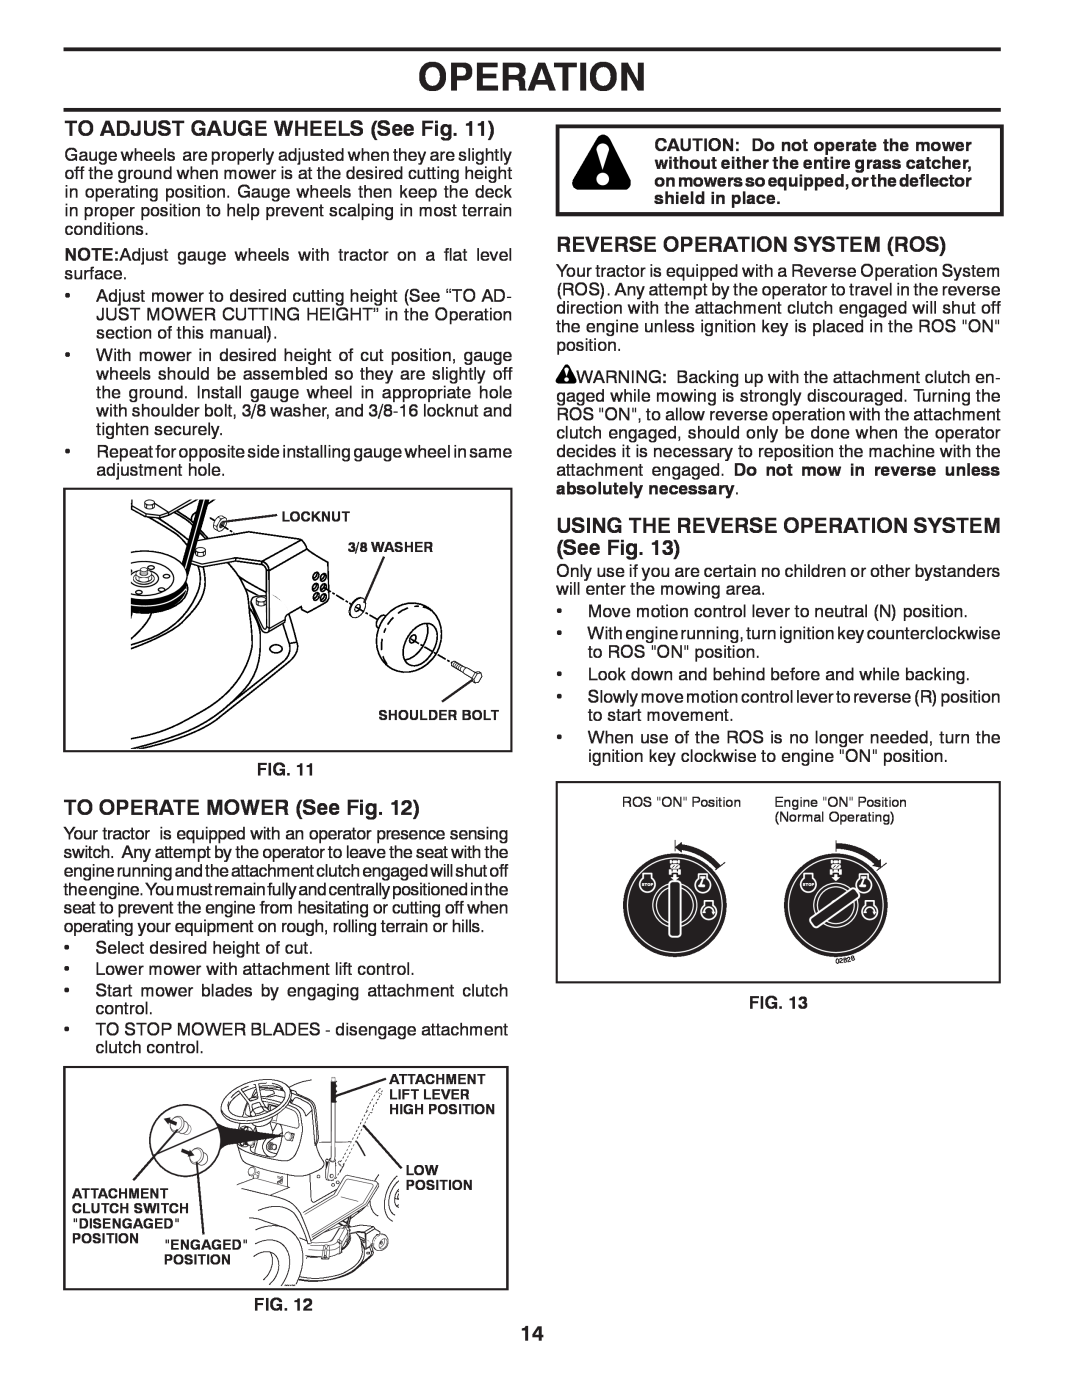 Husqvarna CTH2036 owner manual TO ADJUST GAUGE WHEELS See Fig, TO OPERATE MOWER See Fig, Reverse Operation System Ros 